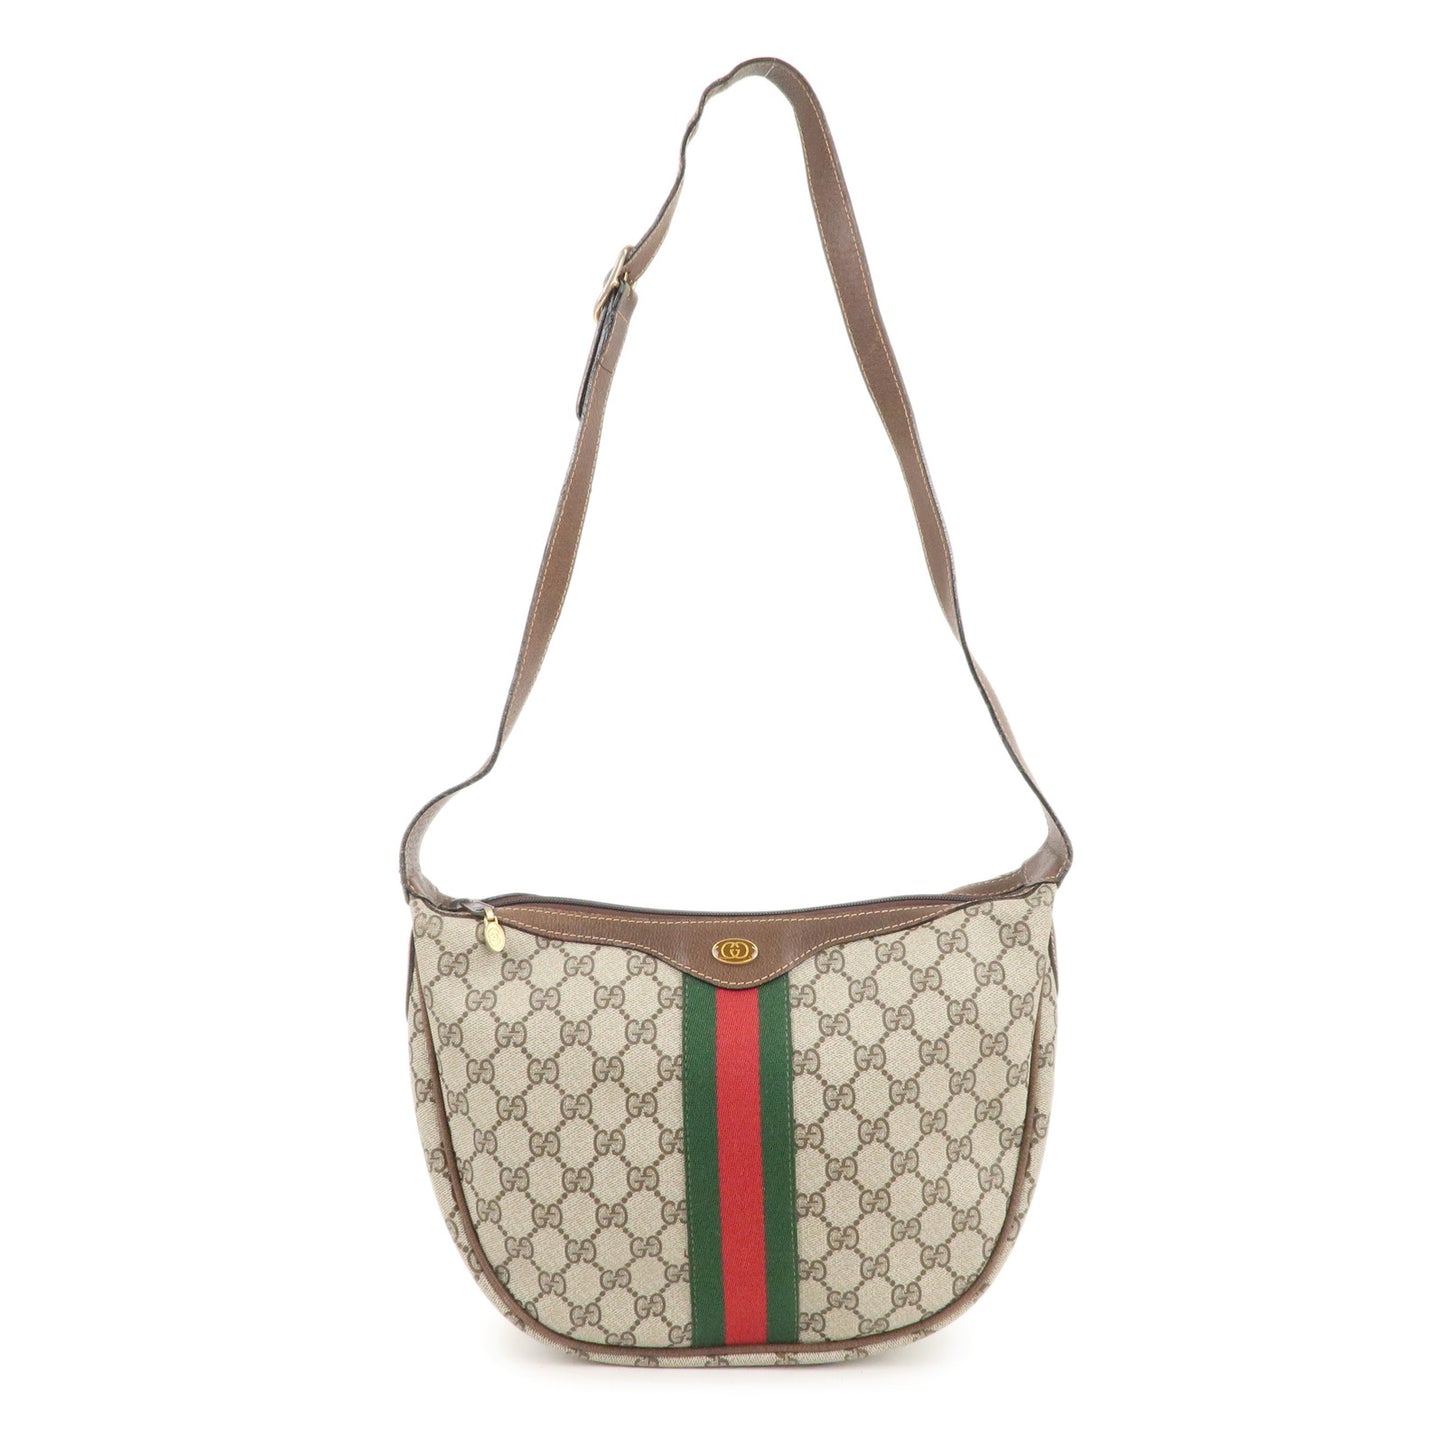 GUCCI Sherry Old Gucci GG Plus Leather Shoulder Bag Beige Brown